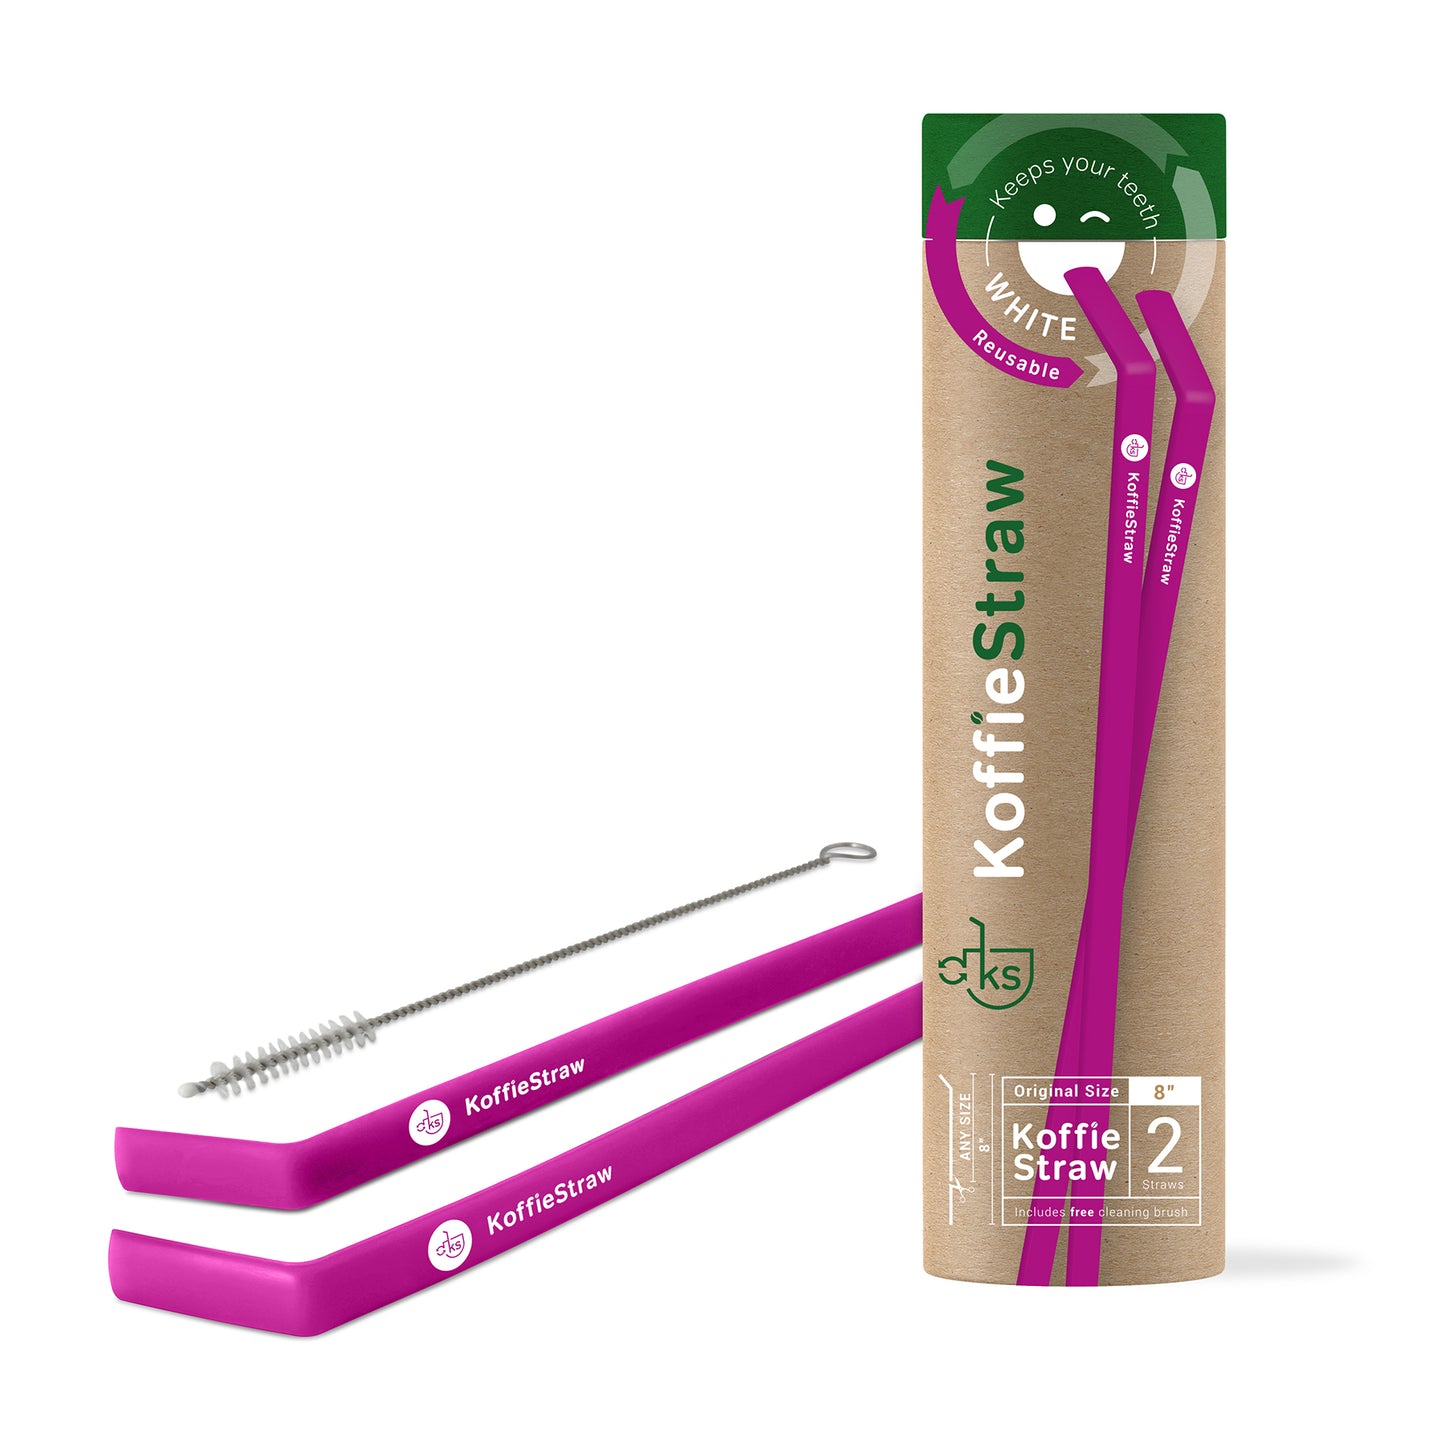 GIFT TUBE of Sugar Plum KoffieStraws: 2x of 8" KoffieStraws and 1x stainless steel cleaning brush